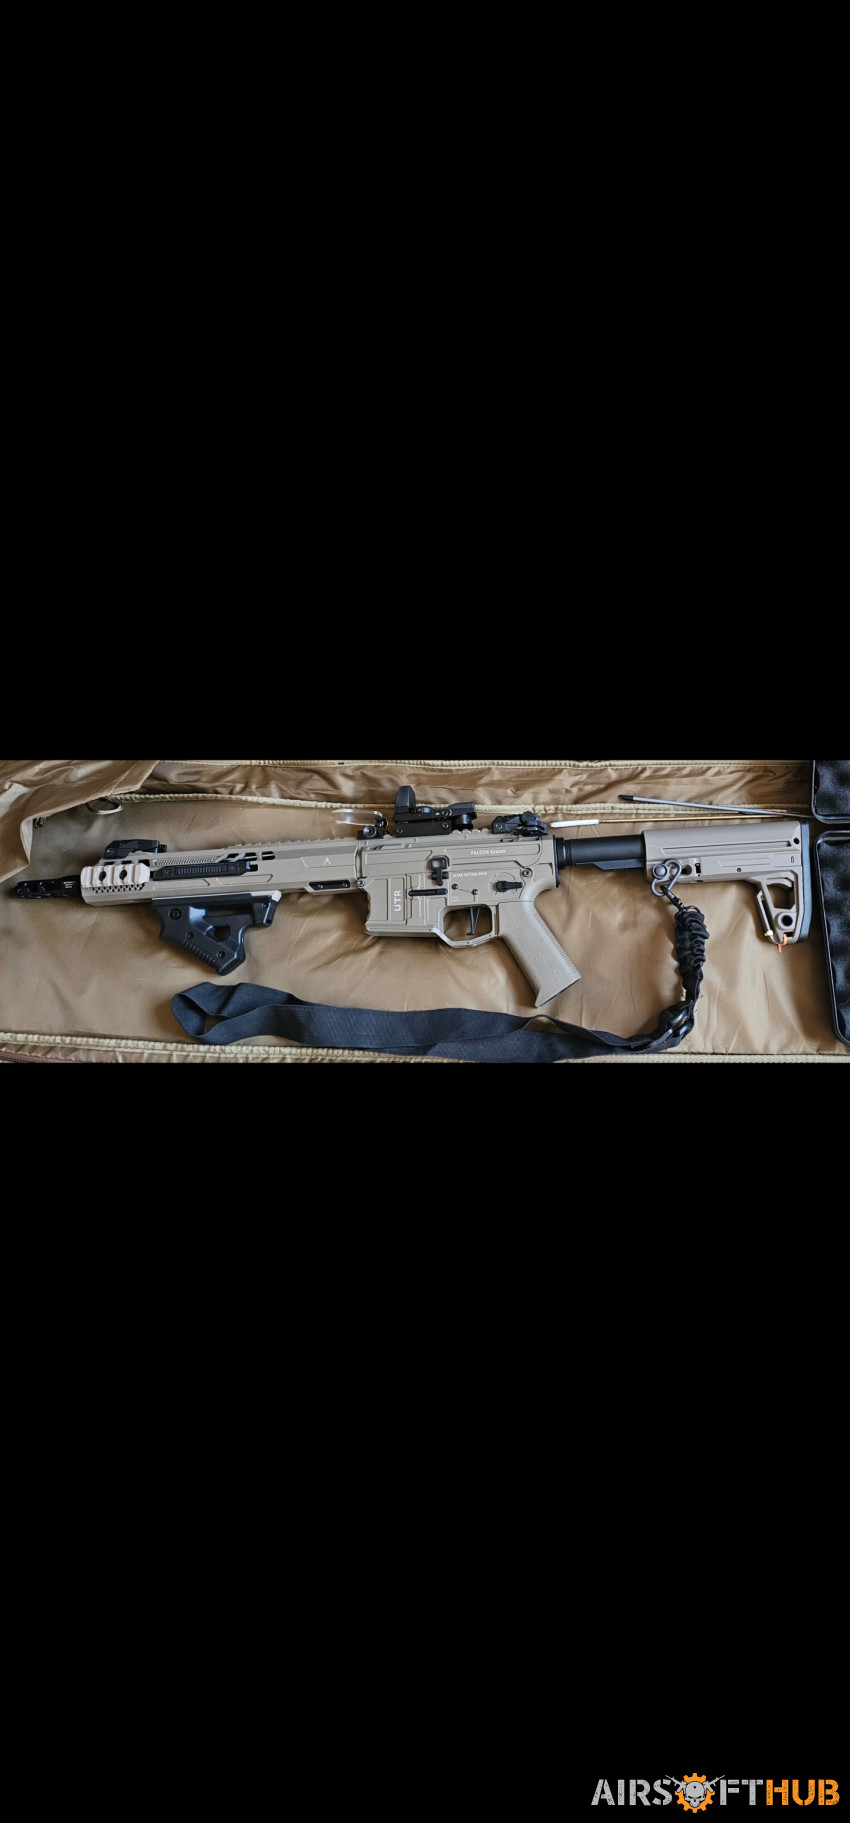 Double eagle utr 556 - Used airsoft equipment